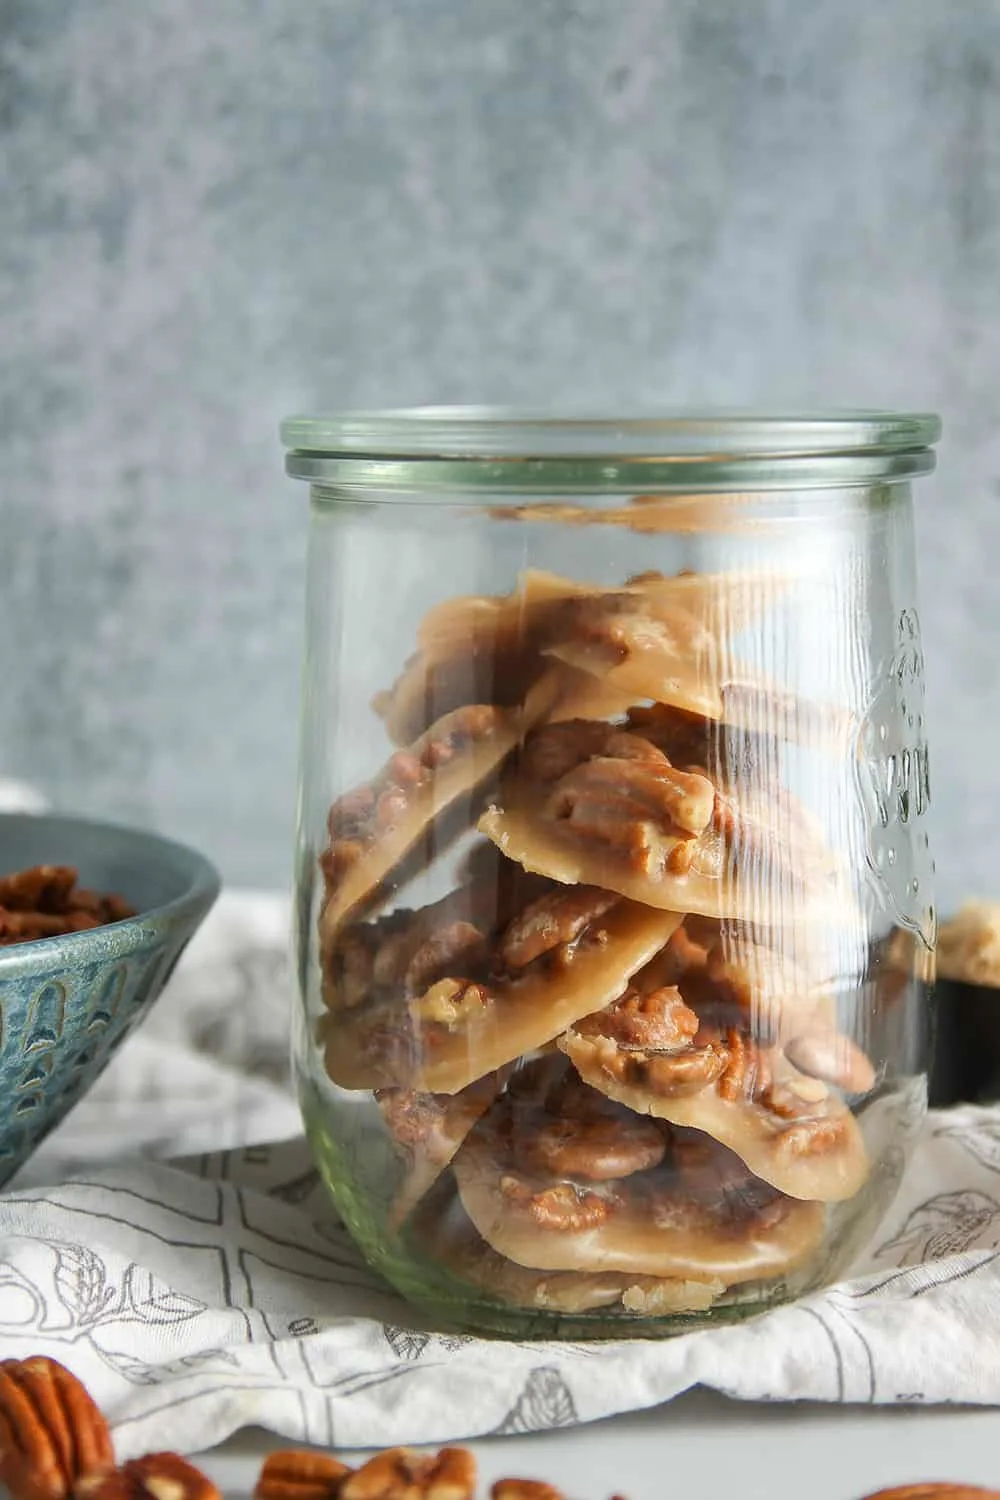 Make Pecan Pralines, a New Orleans favorite, easily at home